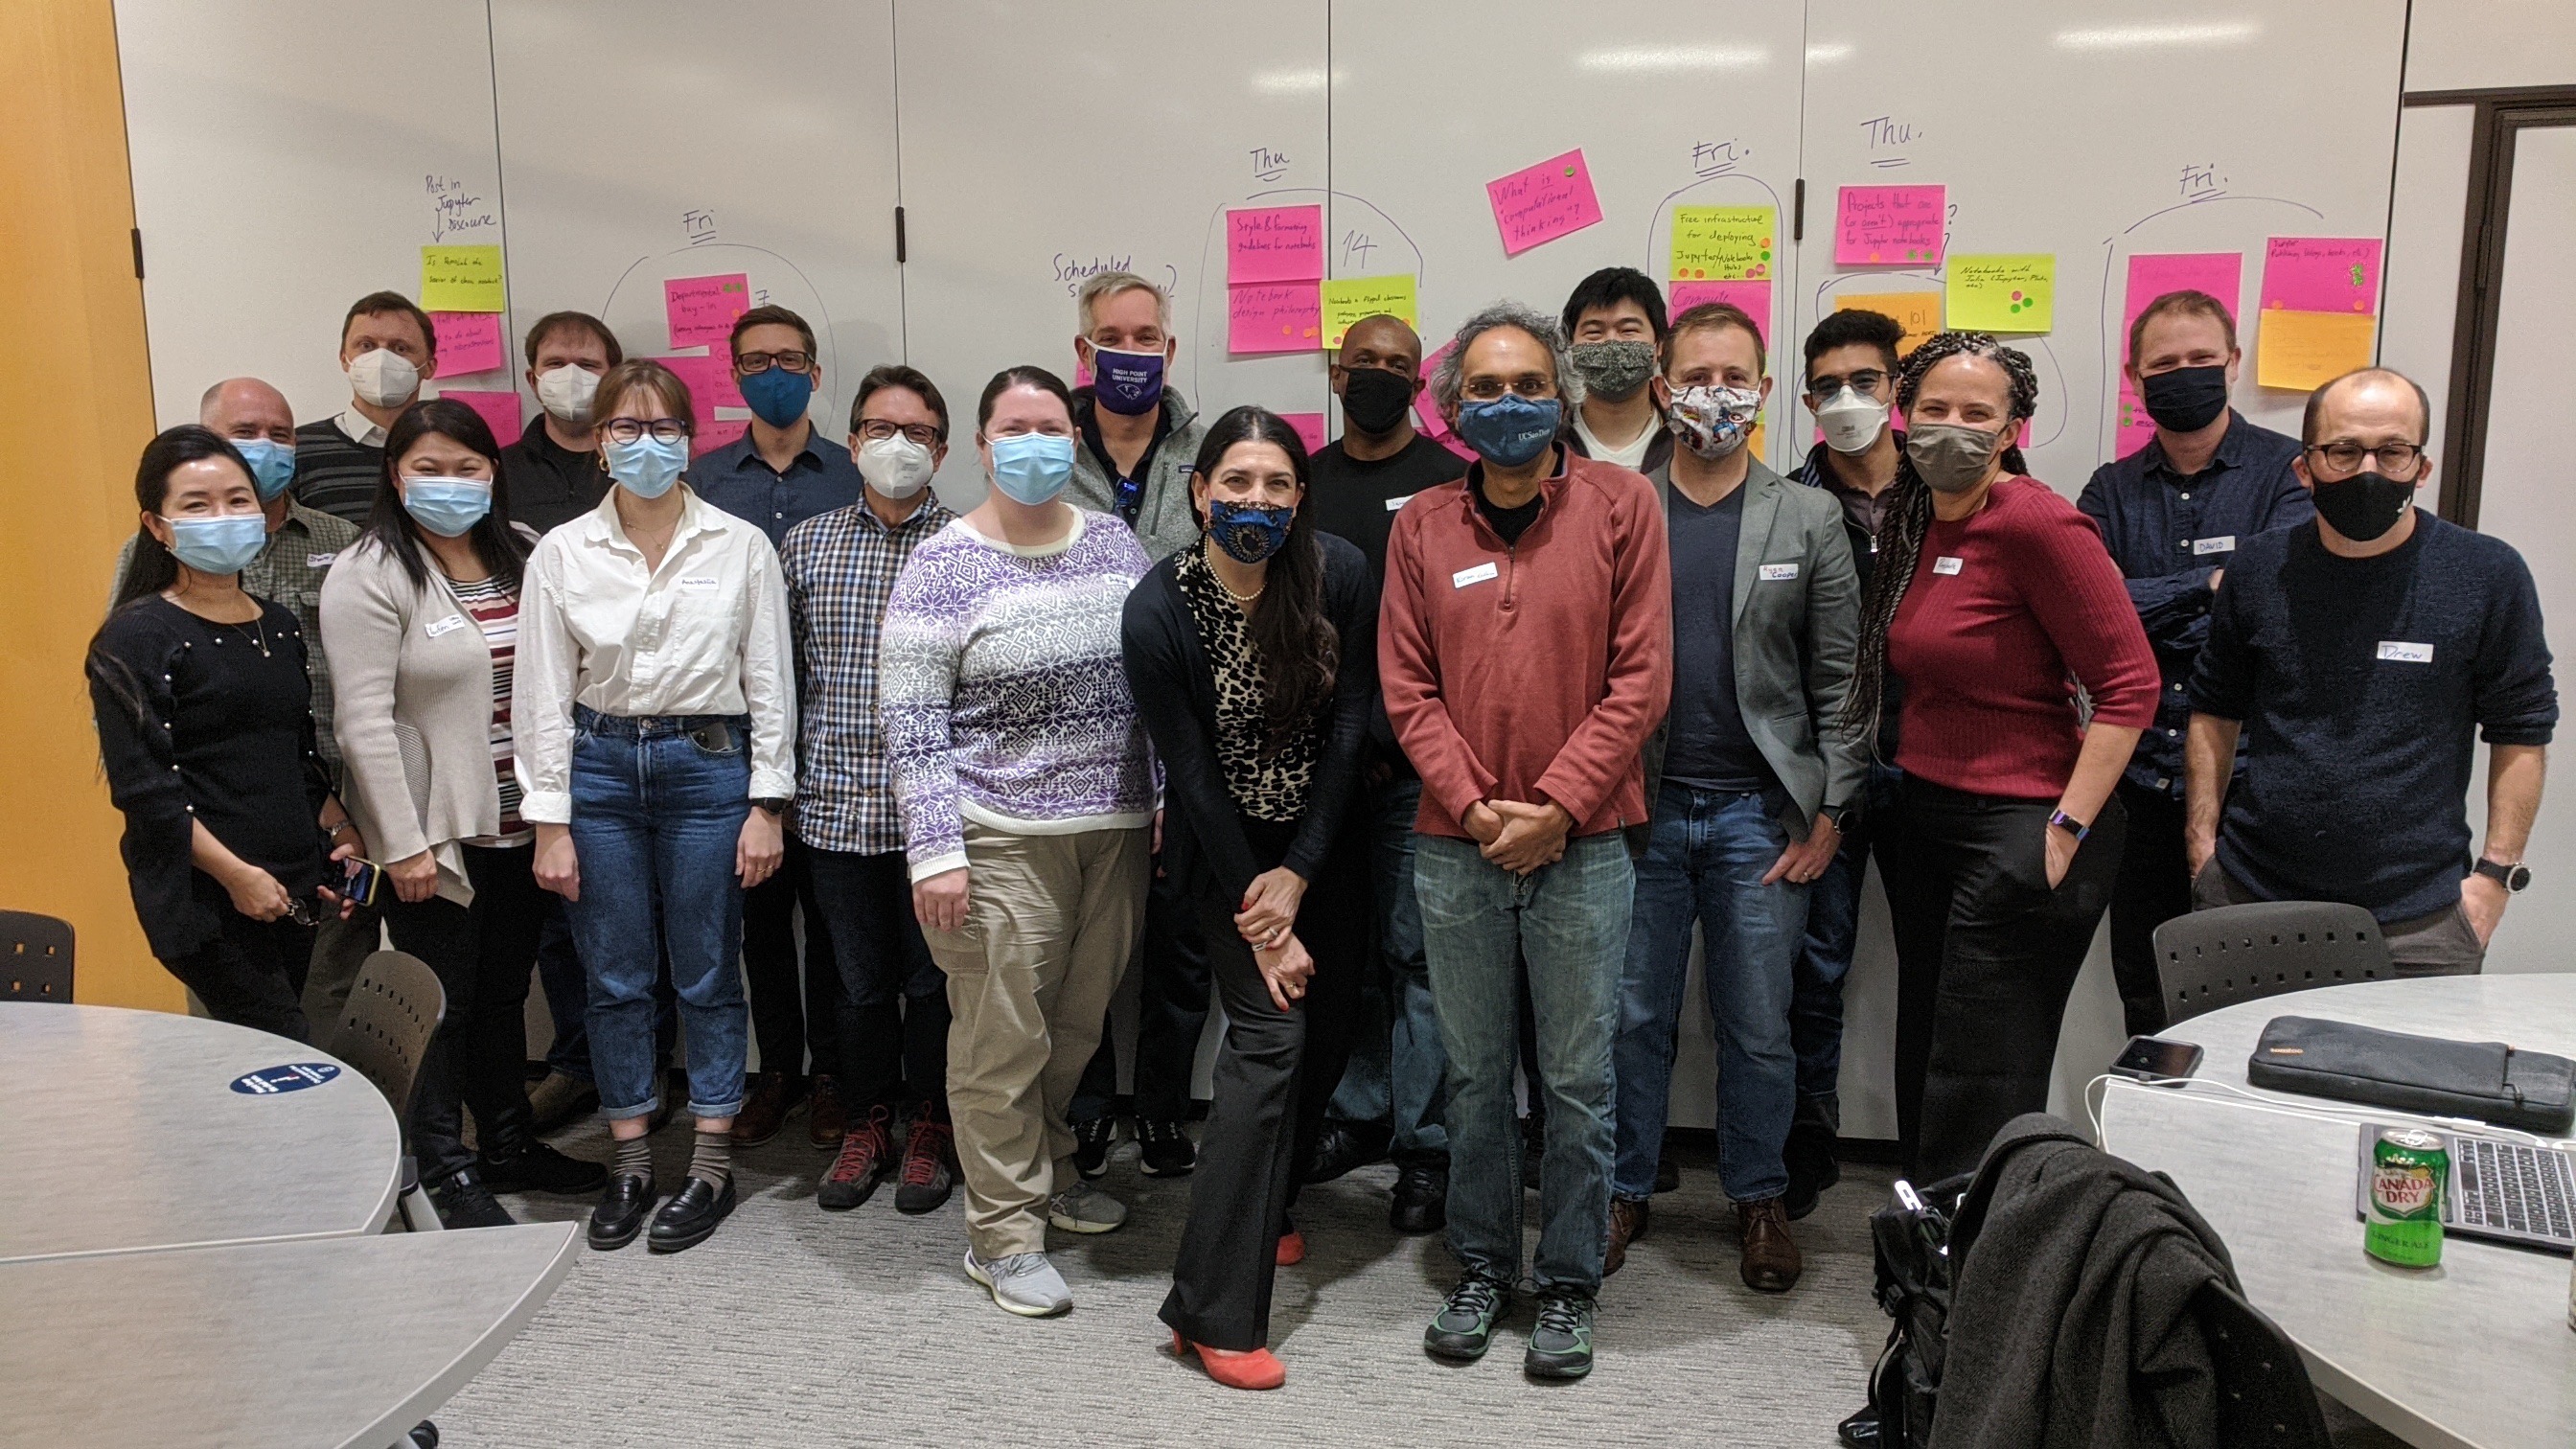 Group photo from the GW workshop event. Importantly: everyone is wearing a mask!